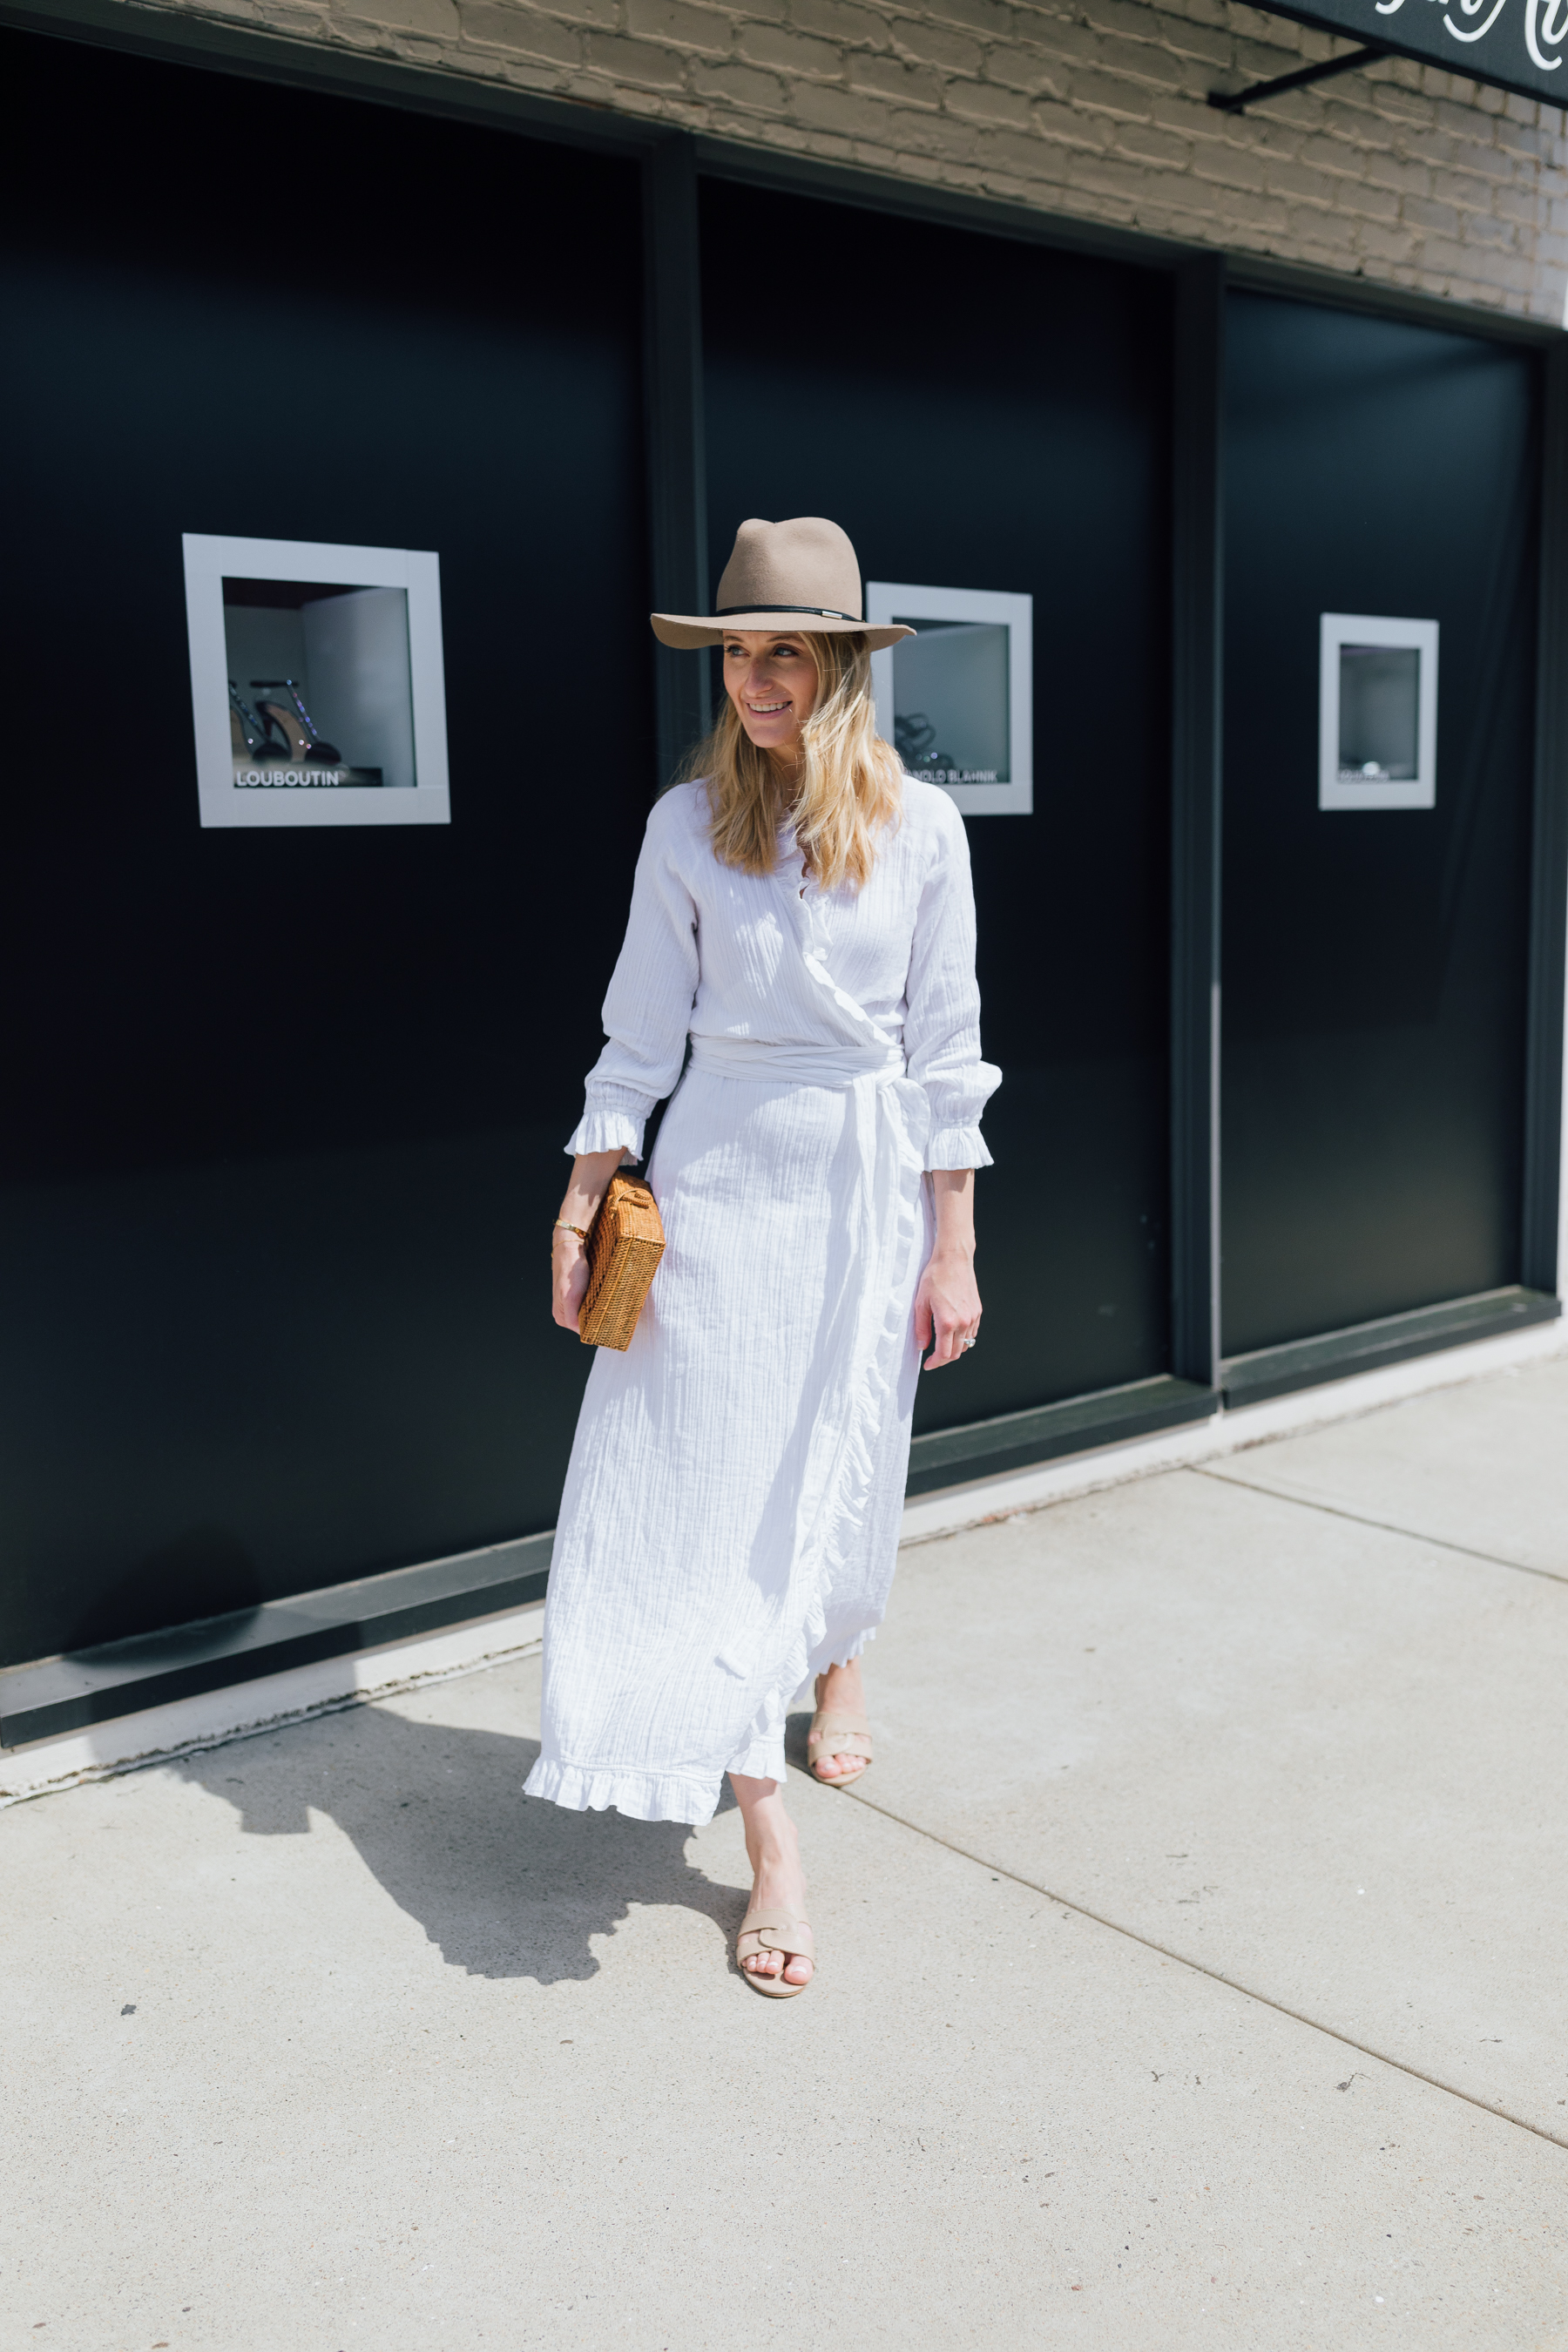 Cindy Trotta from Cindy Hattersley in Rhode Resort Dress // How to style a hat for summer // White dress for summer